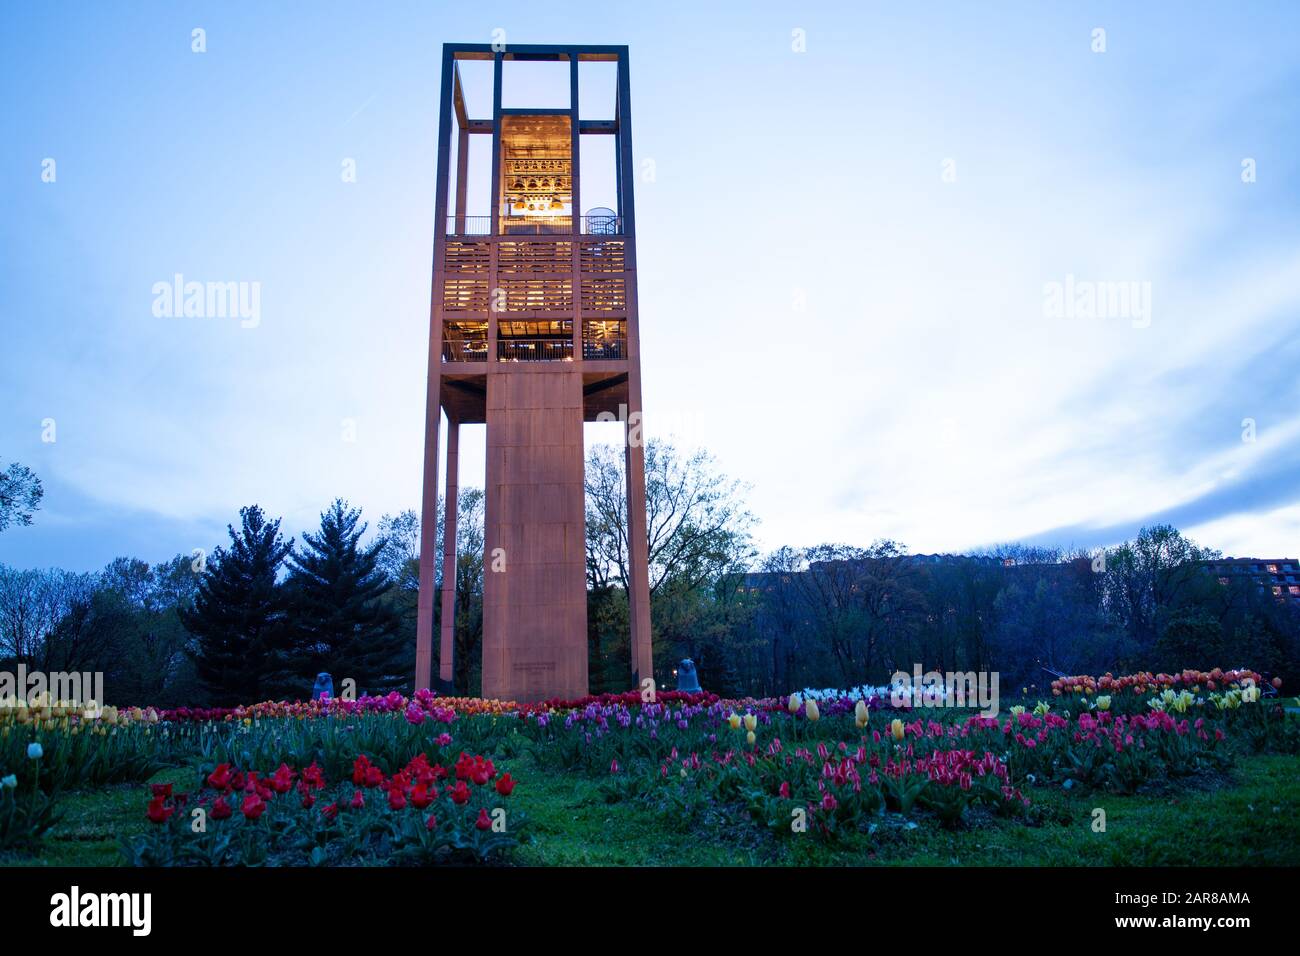 ARLINGTON, VA - APRIL 27, 2018: Netherlands Carillon monument near to Arlington National Cemetery with 50 bells on the tower during evening Stock Photo